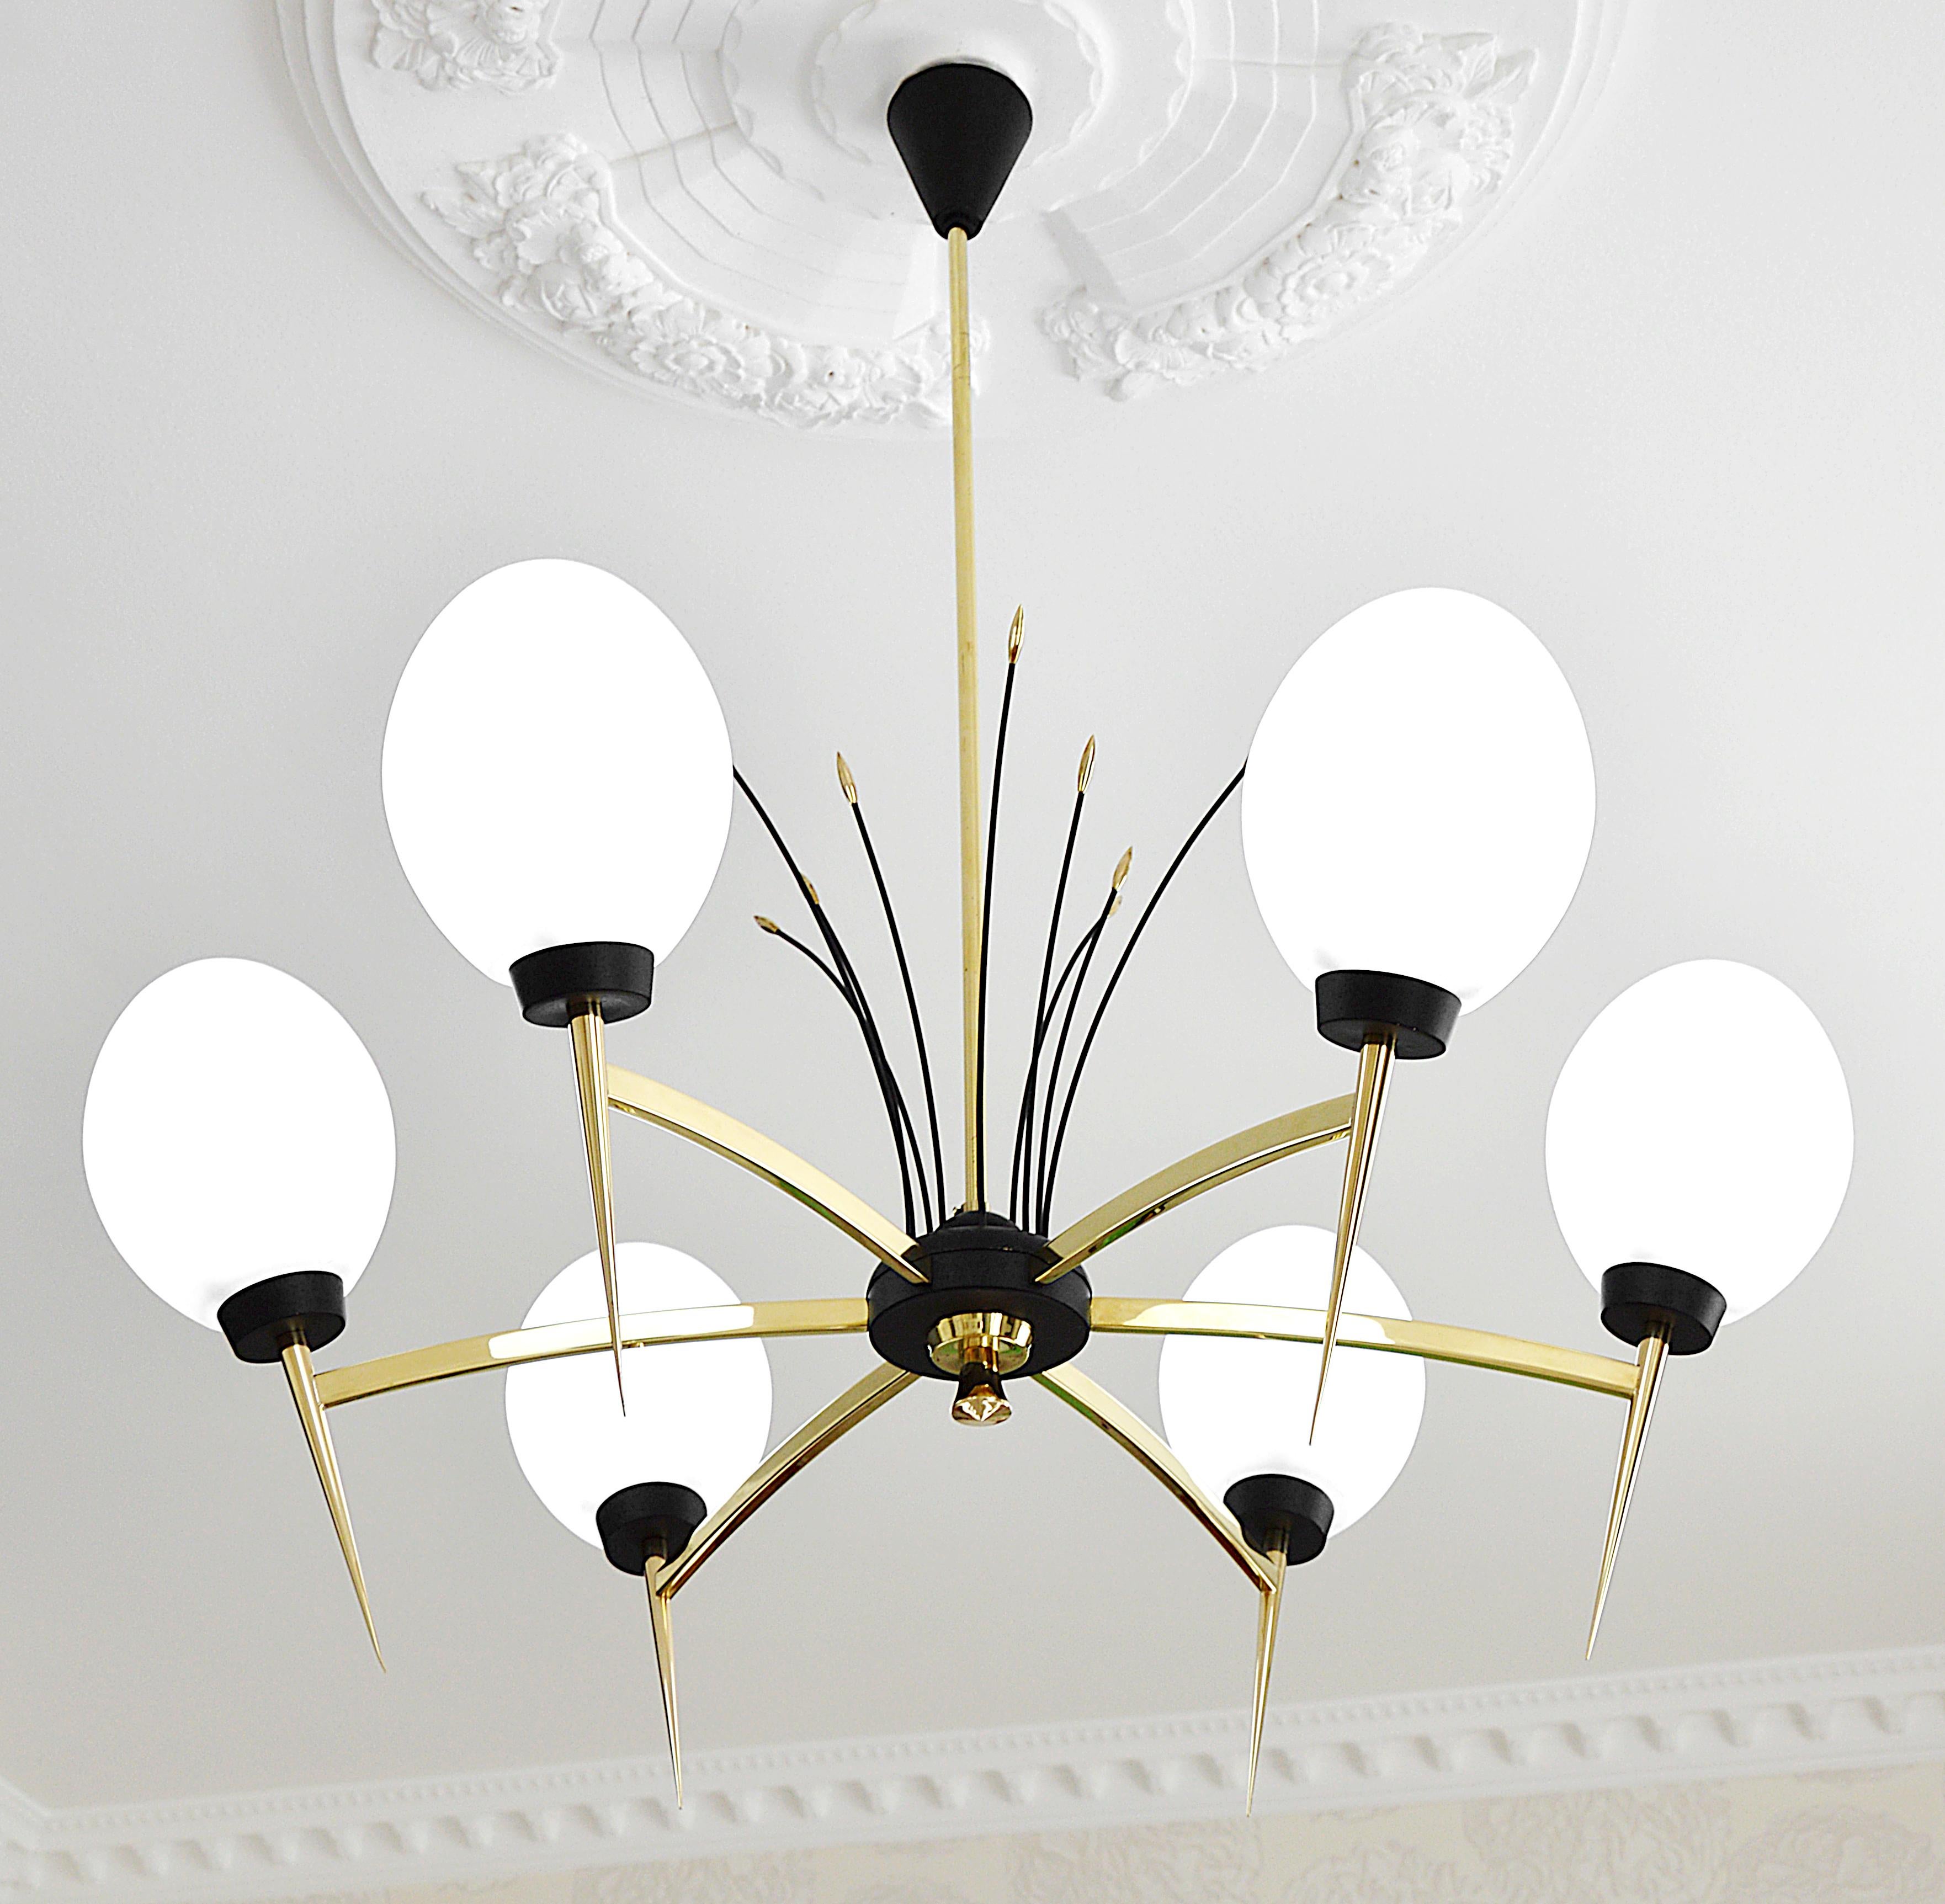 Gorgeous French midcentury chandelier attributed to LUNEL (Paris), France, 1950s. Ostrich egg chandelier. 6 lights. Brass, metal, lucite, plastic and glass. Same period as Arlus and Stilnovo. Measures: Height 33